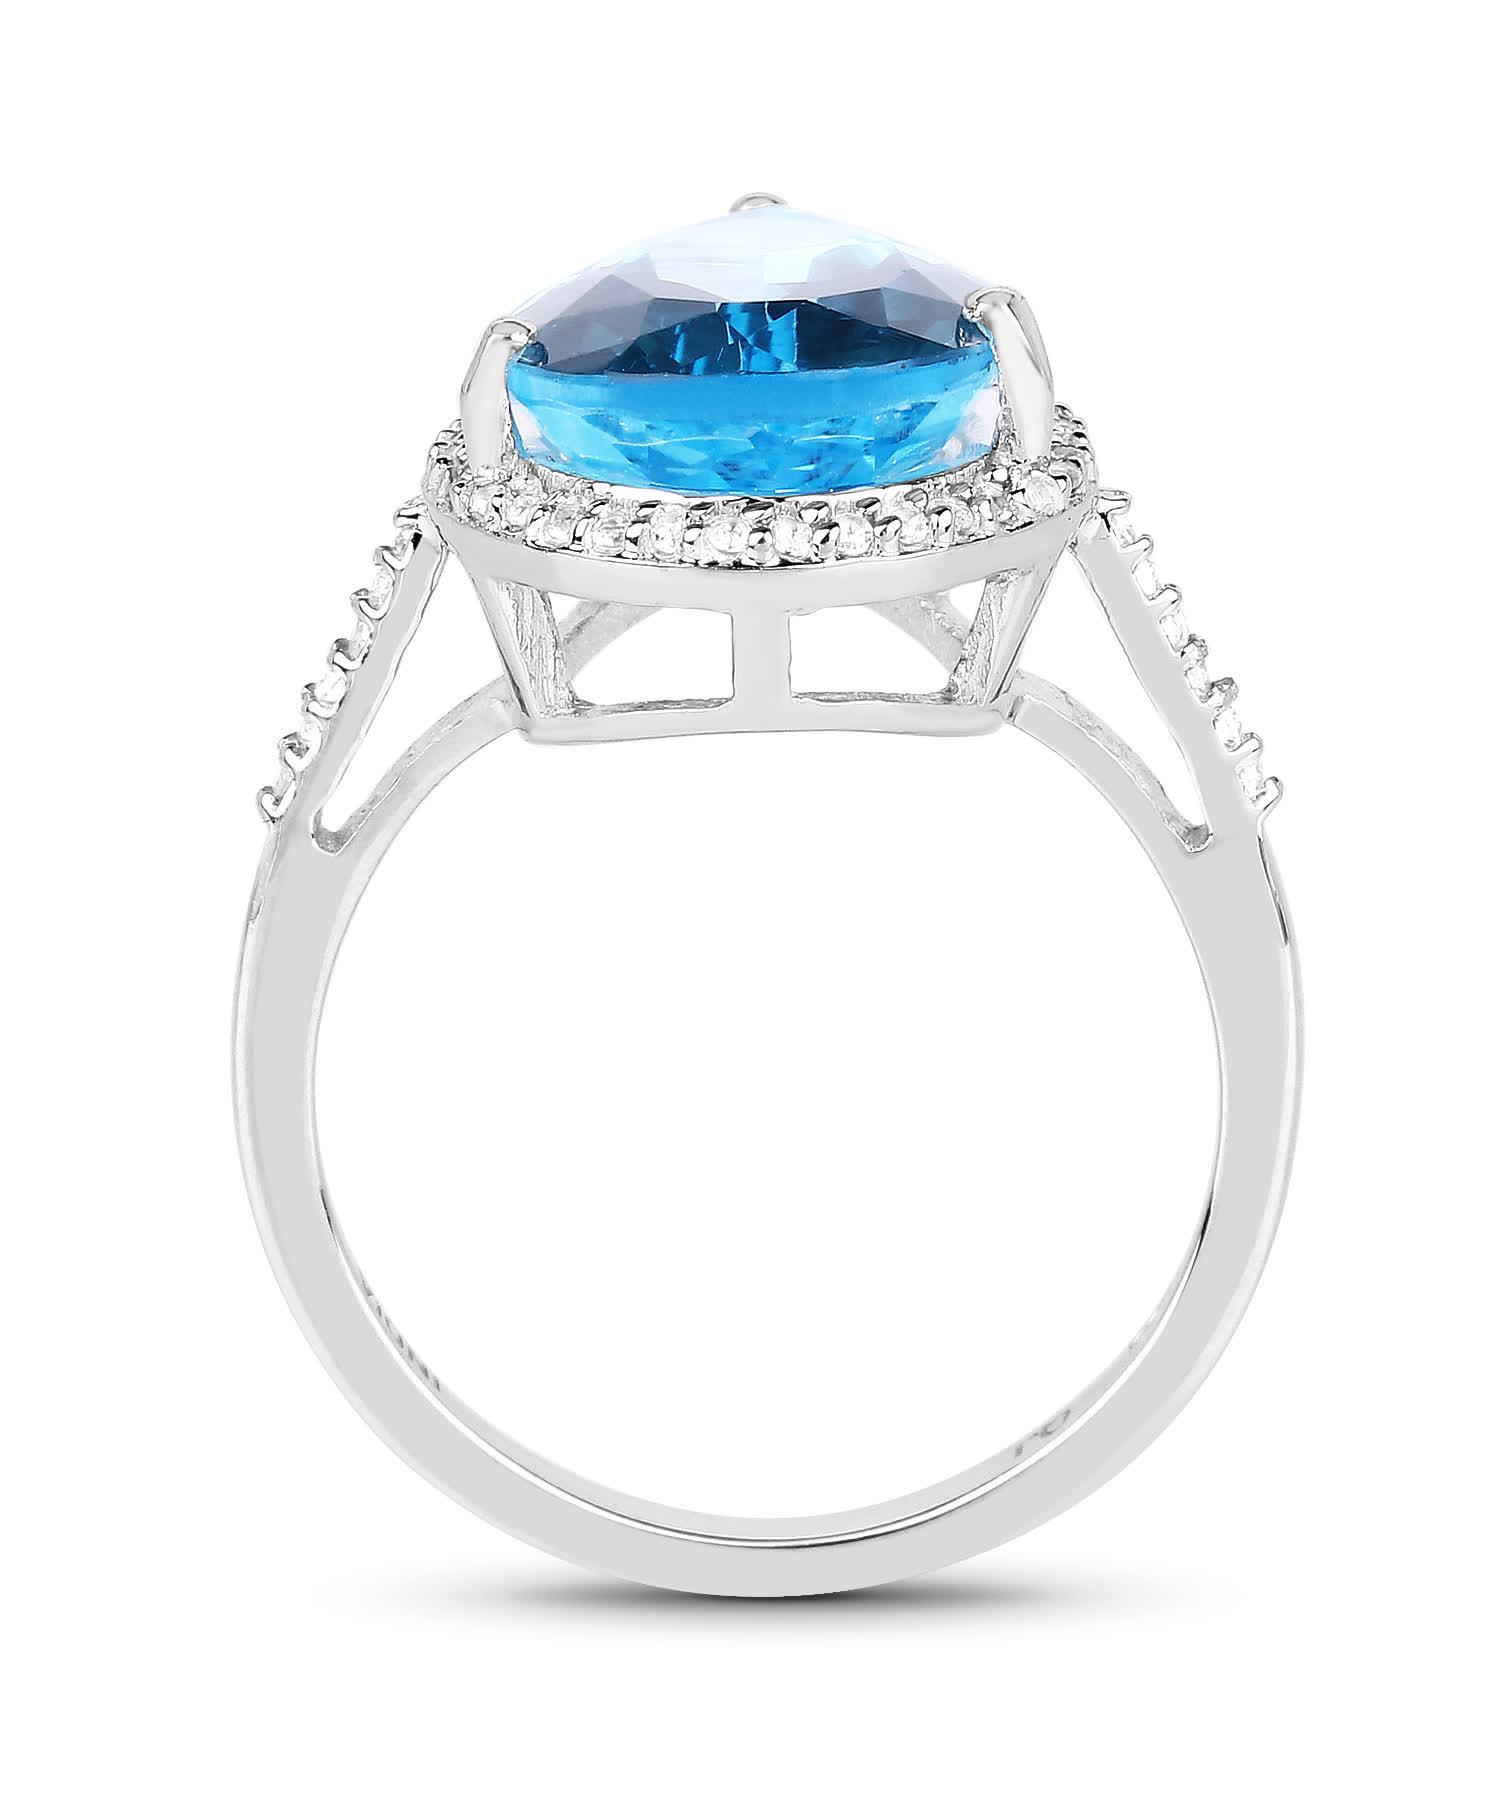 6.77ctw Natural Swiss Blue Topaz Rhodium Plated 925 Sterling Silver Halo Cocktail Ring View 2